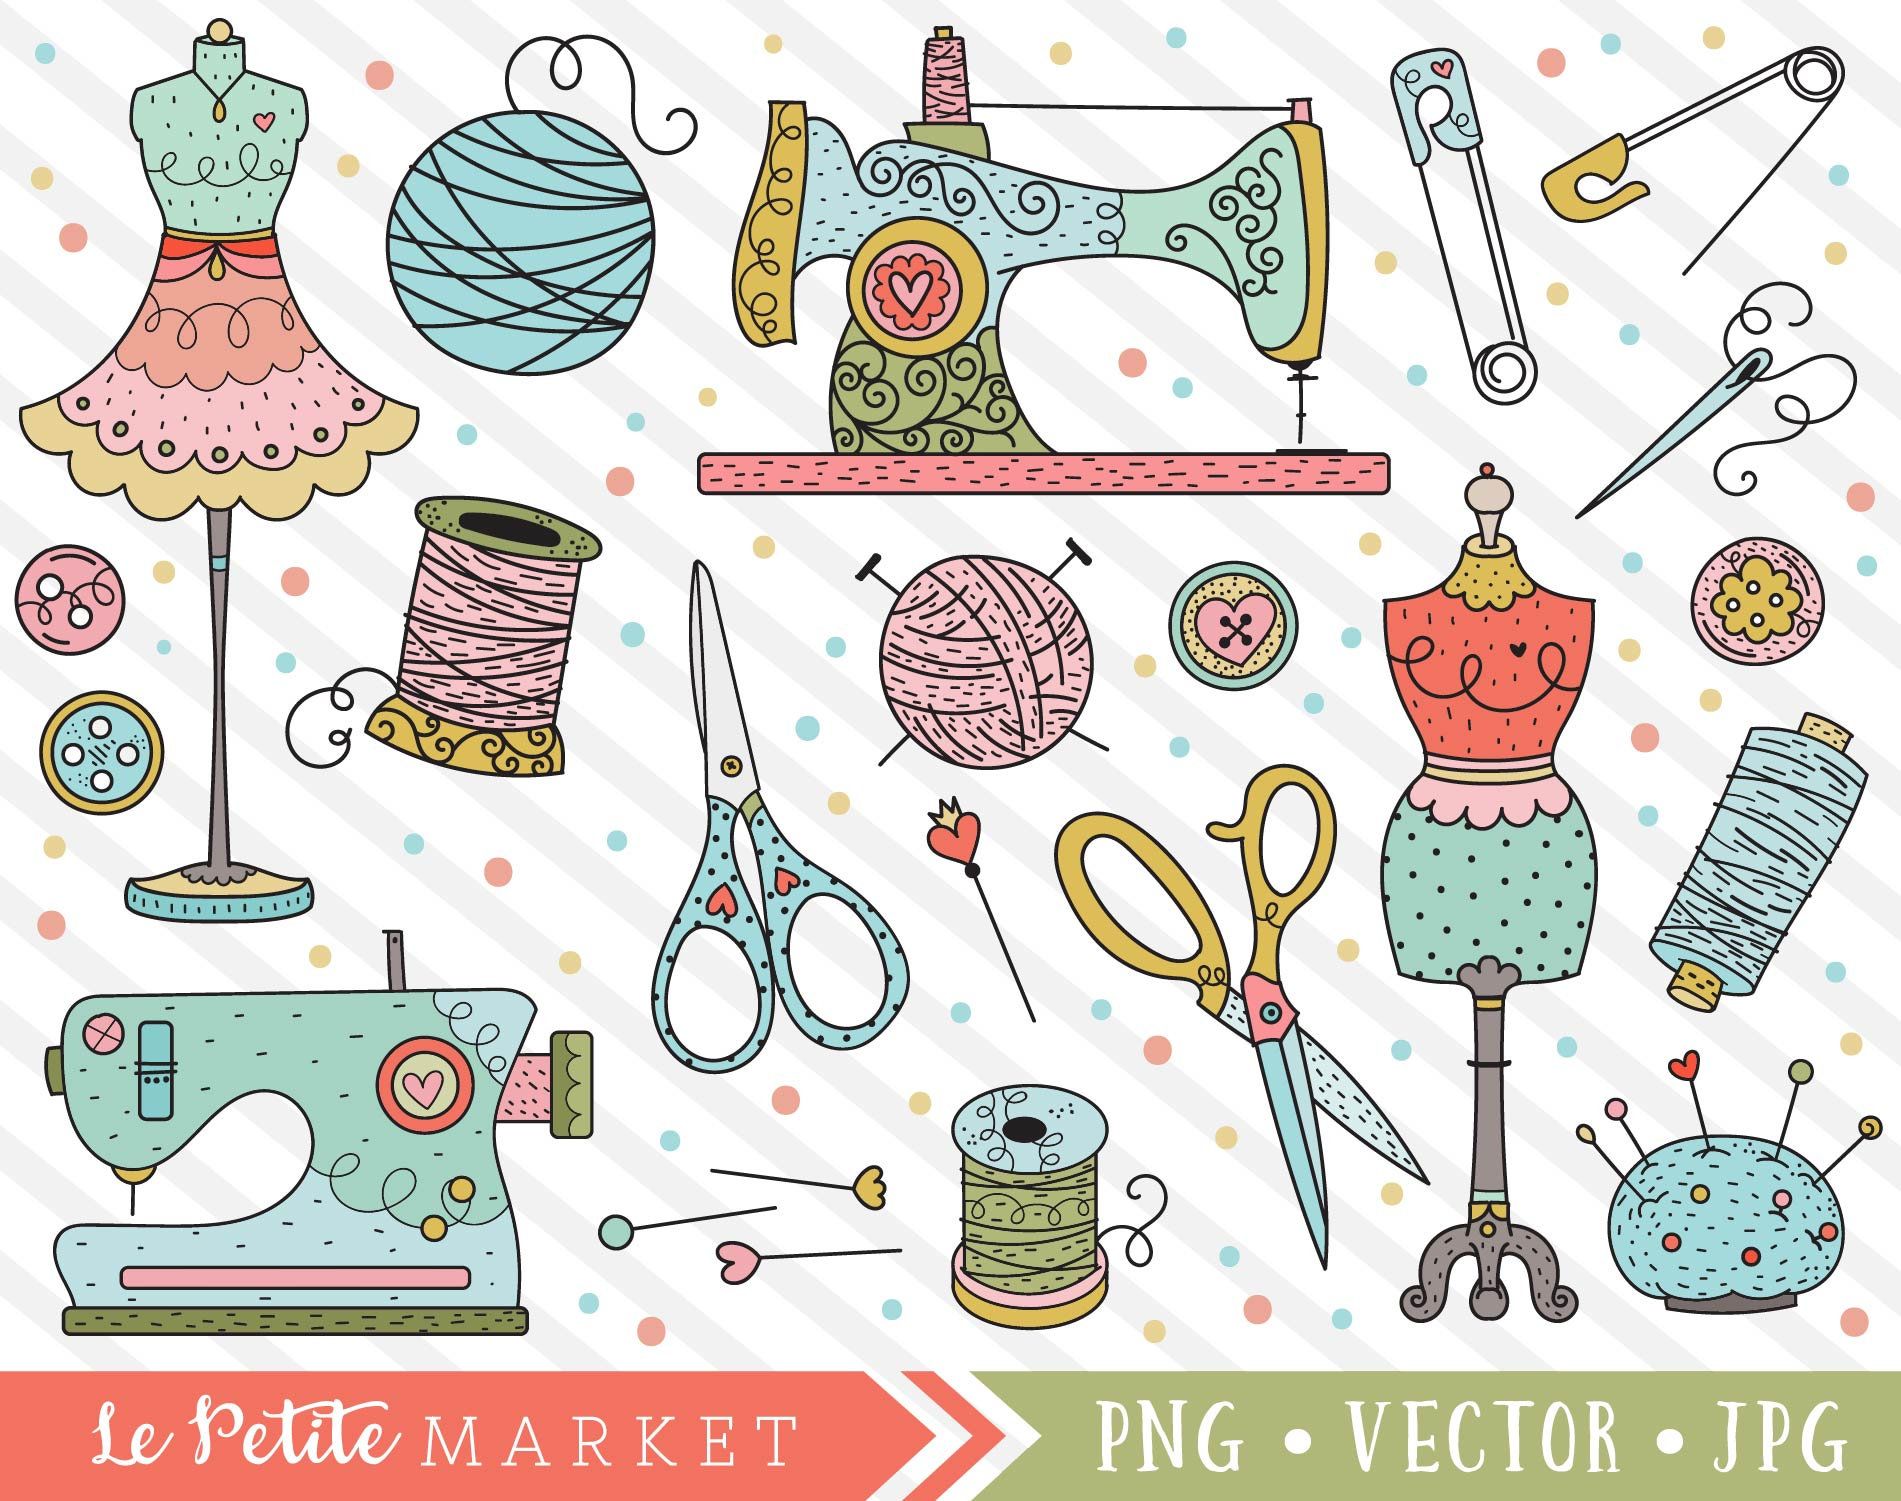 Download Sewing clipart knitting sewing, Sewing knitting sewing ...